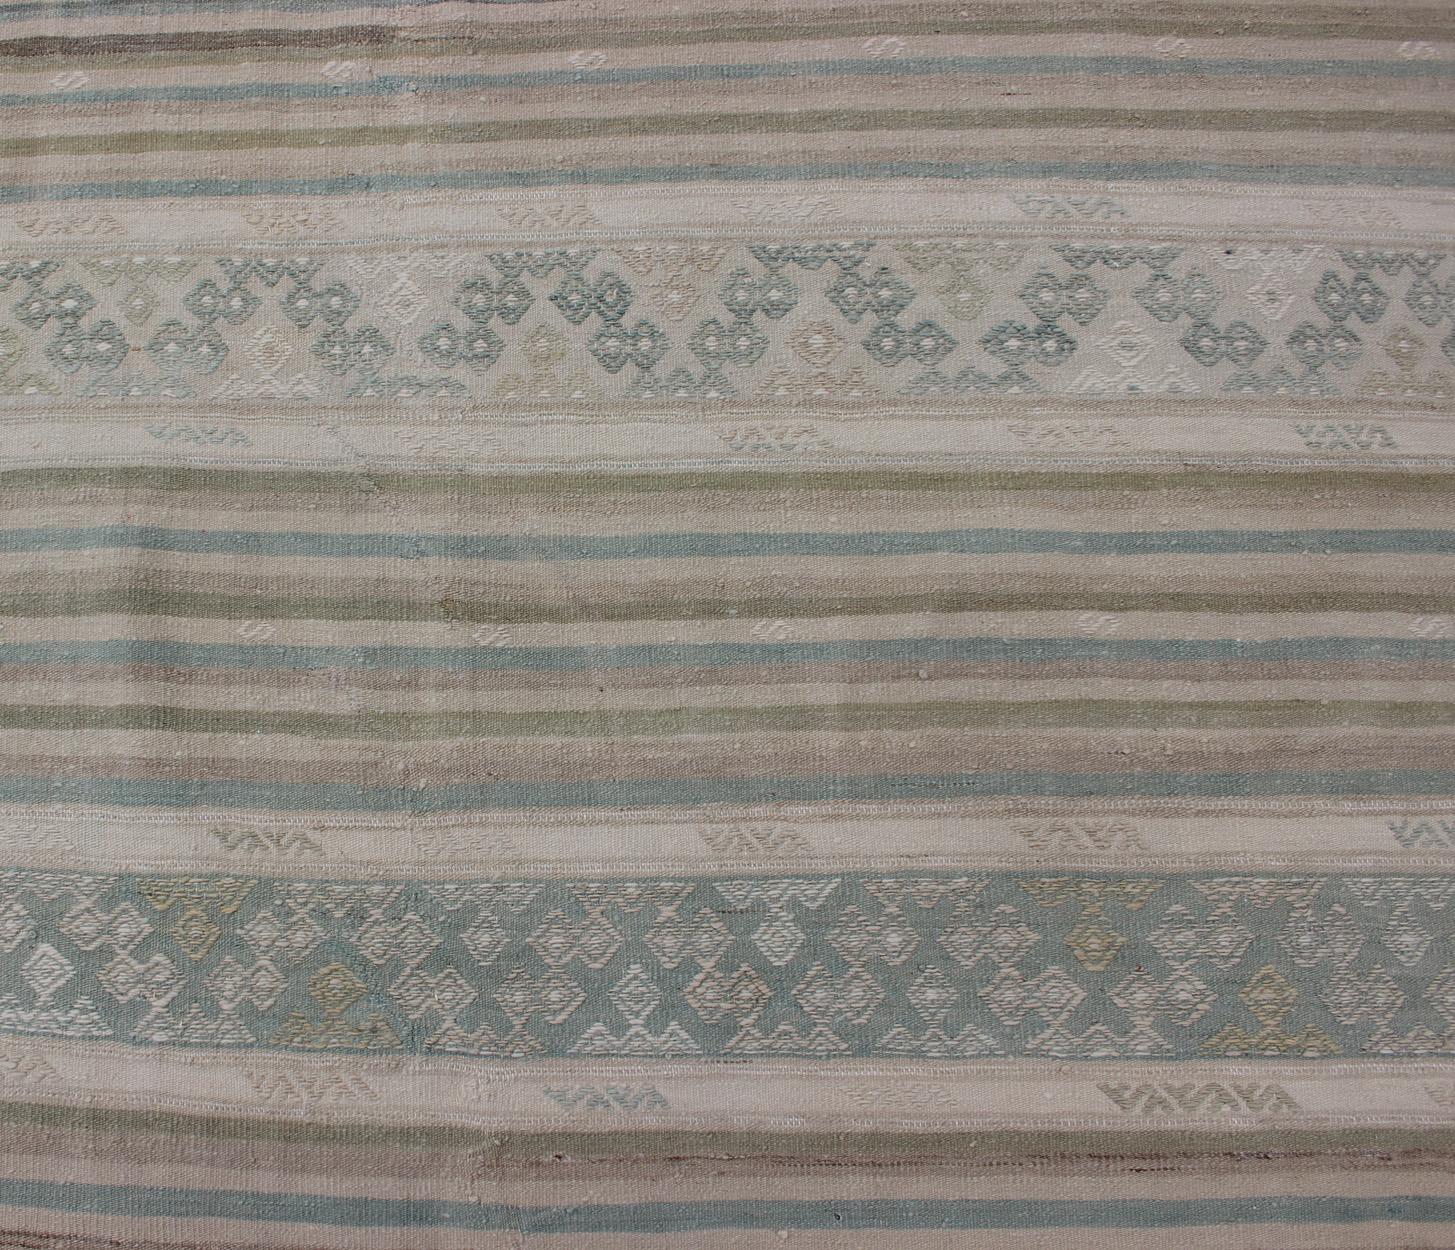 Turkish Flat-Weave Kilim in Muted Colors with Stripes and Embroideries For Sale 1